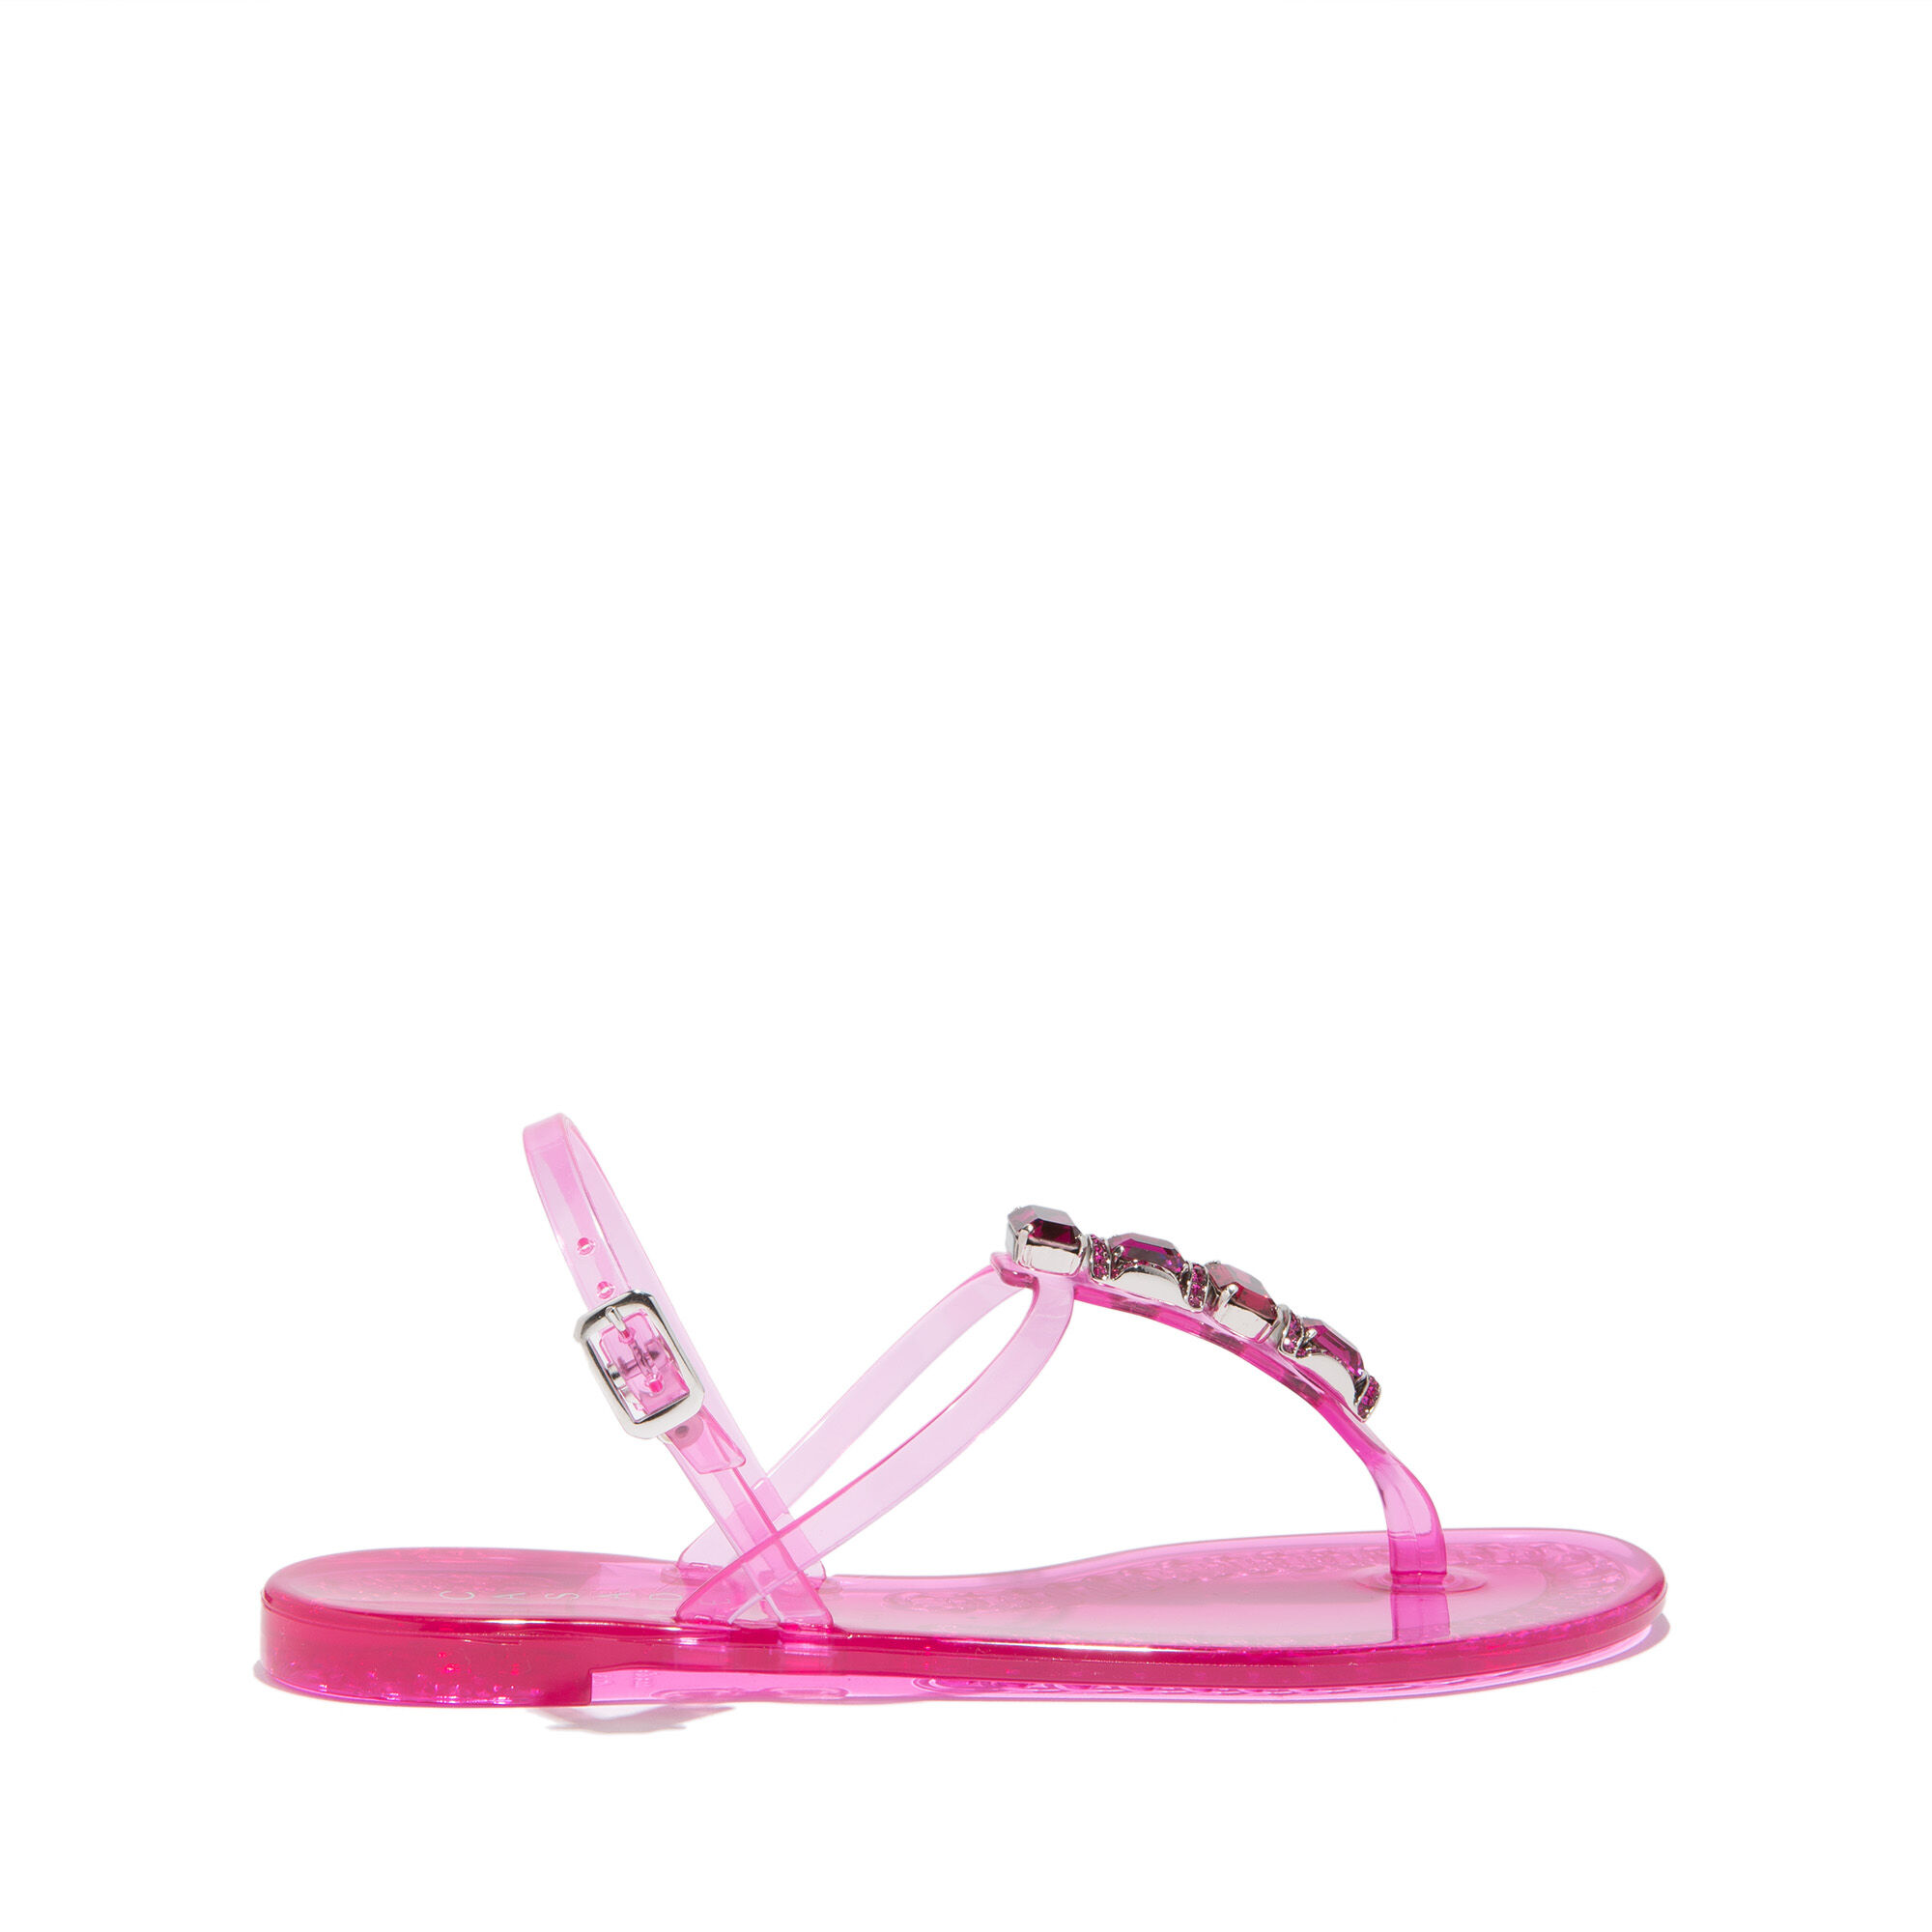 casadei jelly sandals